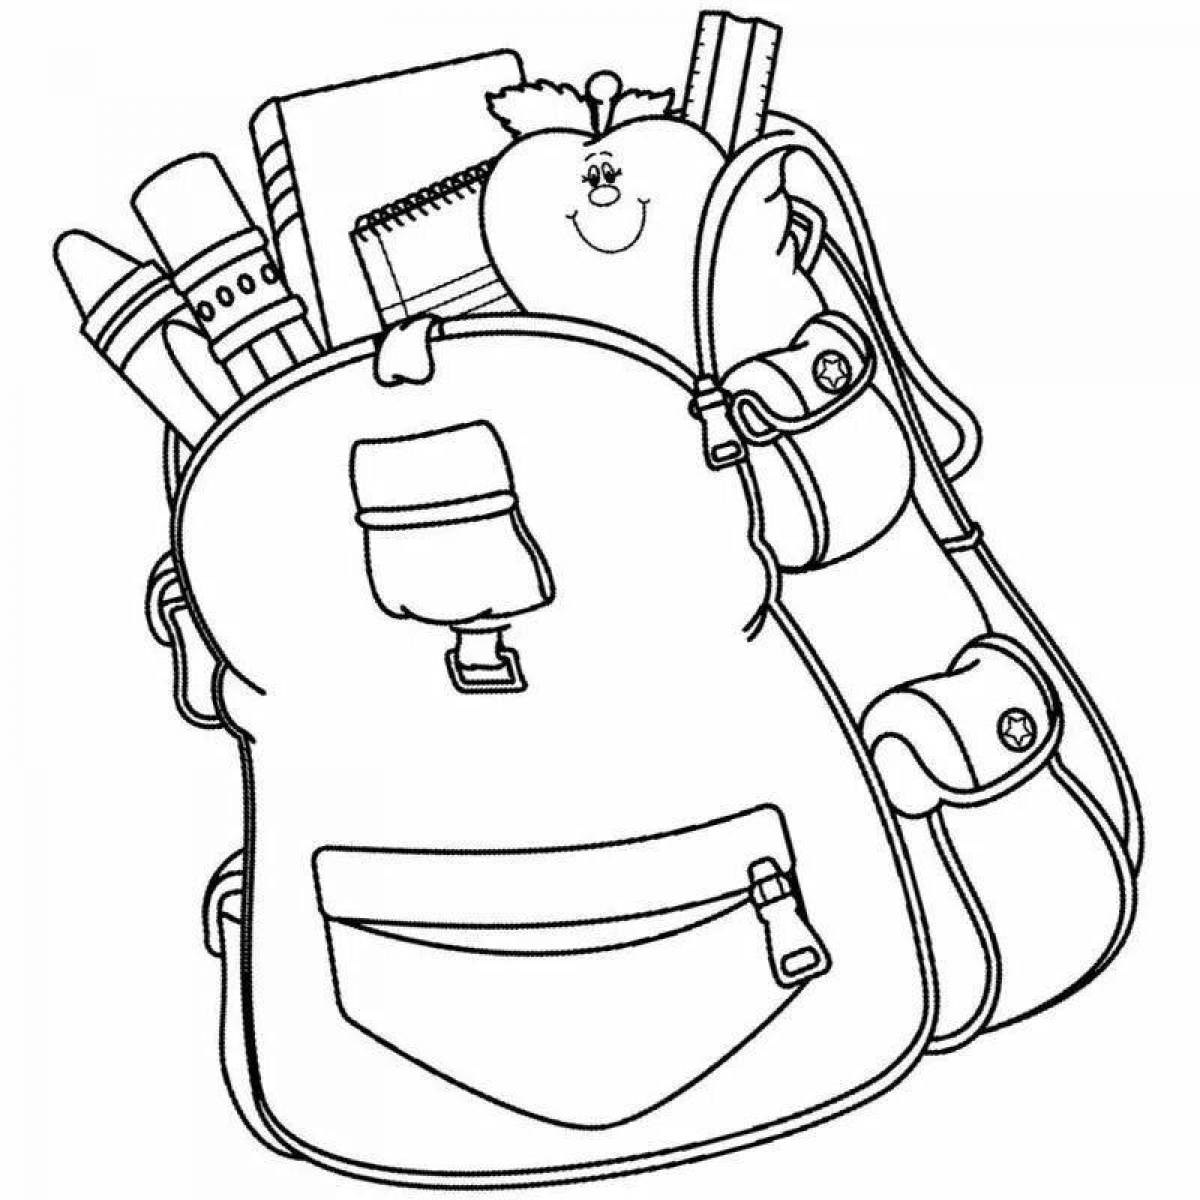 Holiday backpack coloring page